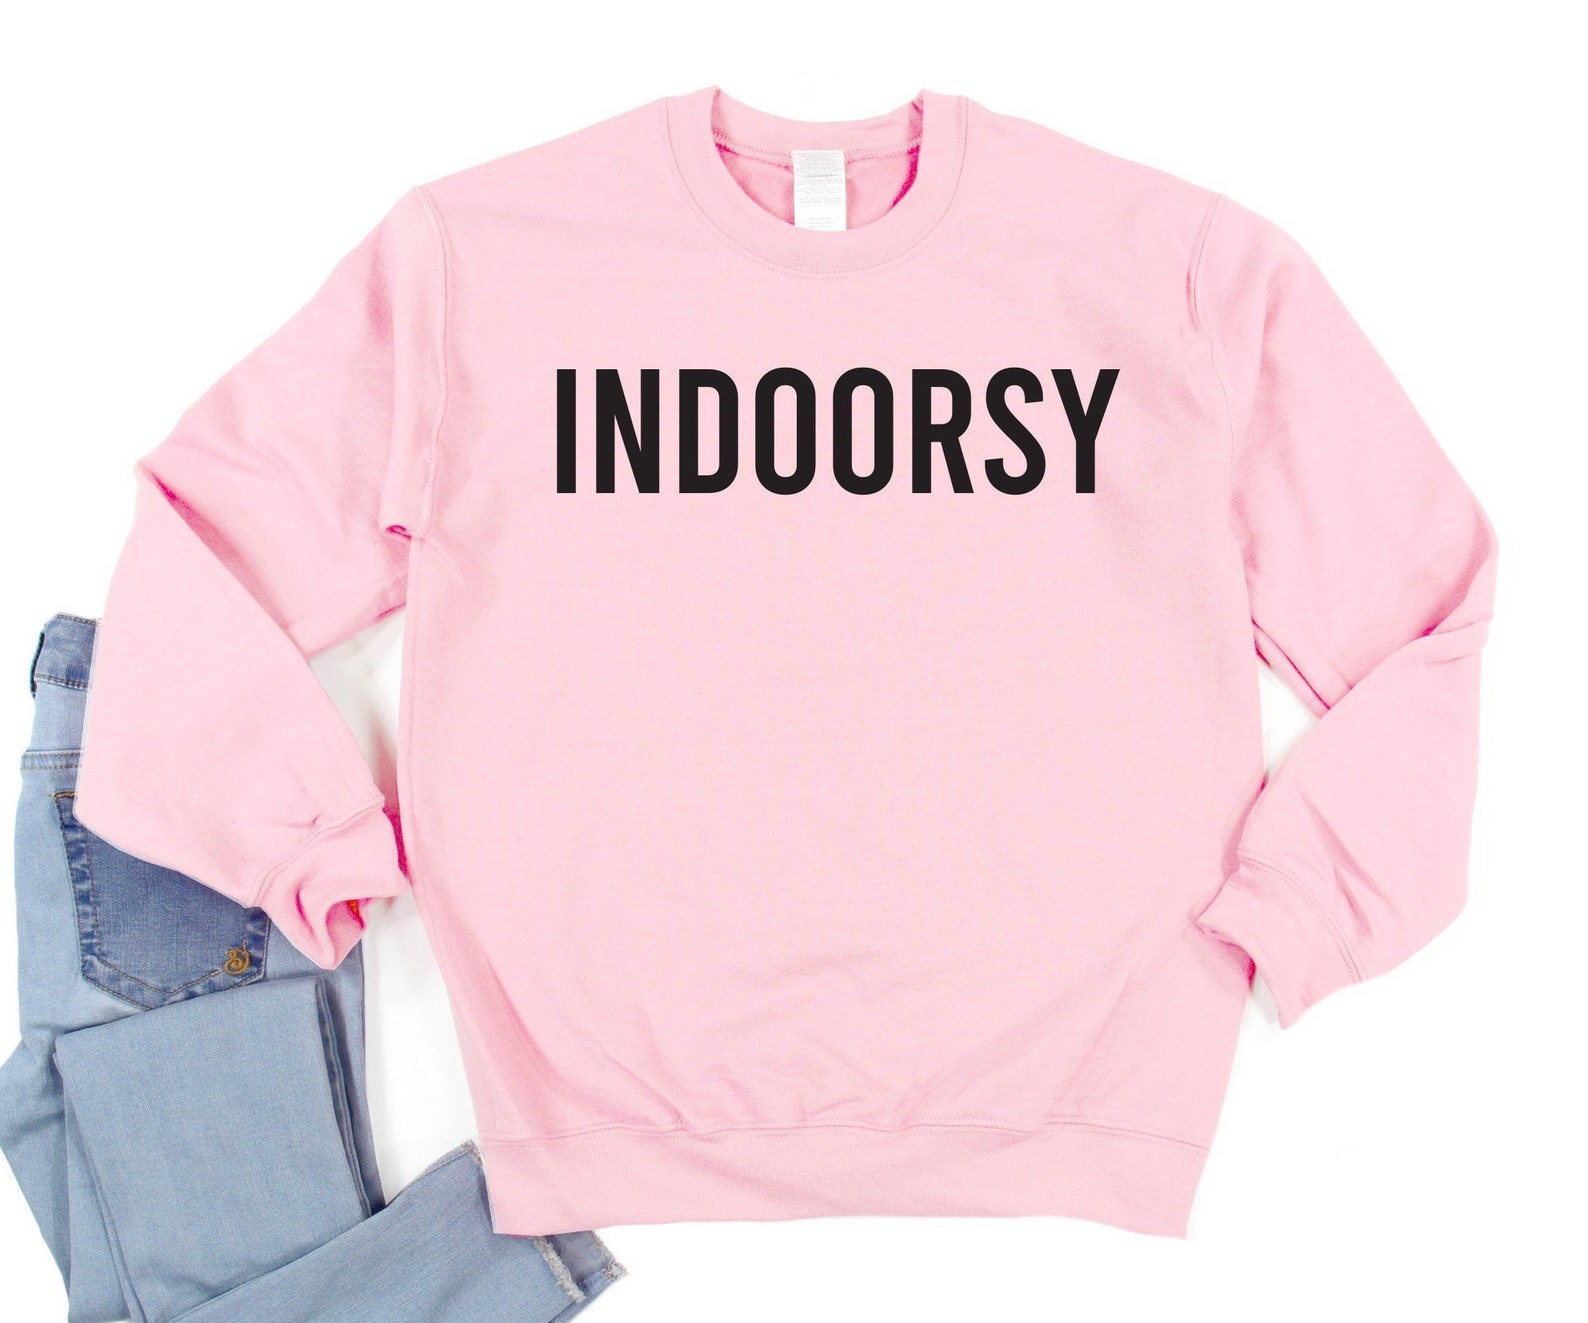 Indoorsy Sweatshirt Indoorsy Shirt Indoorsy Cute Gifts | Etsy